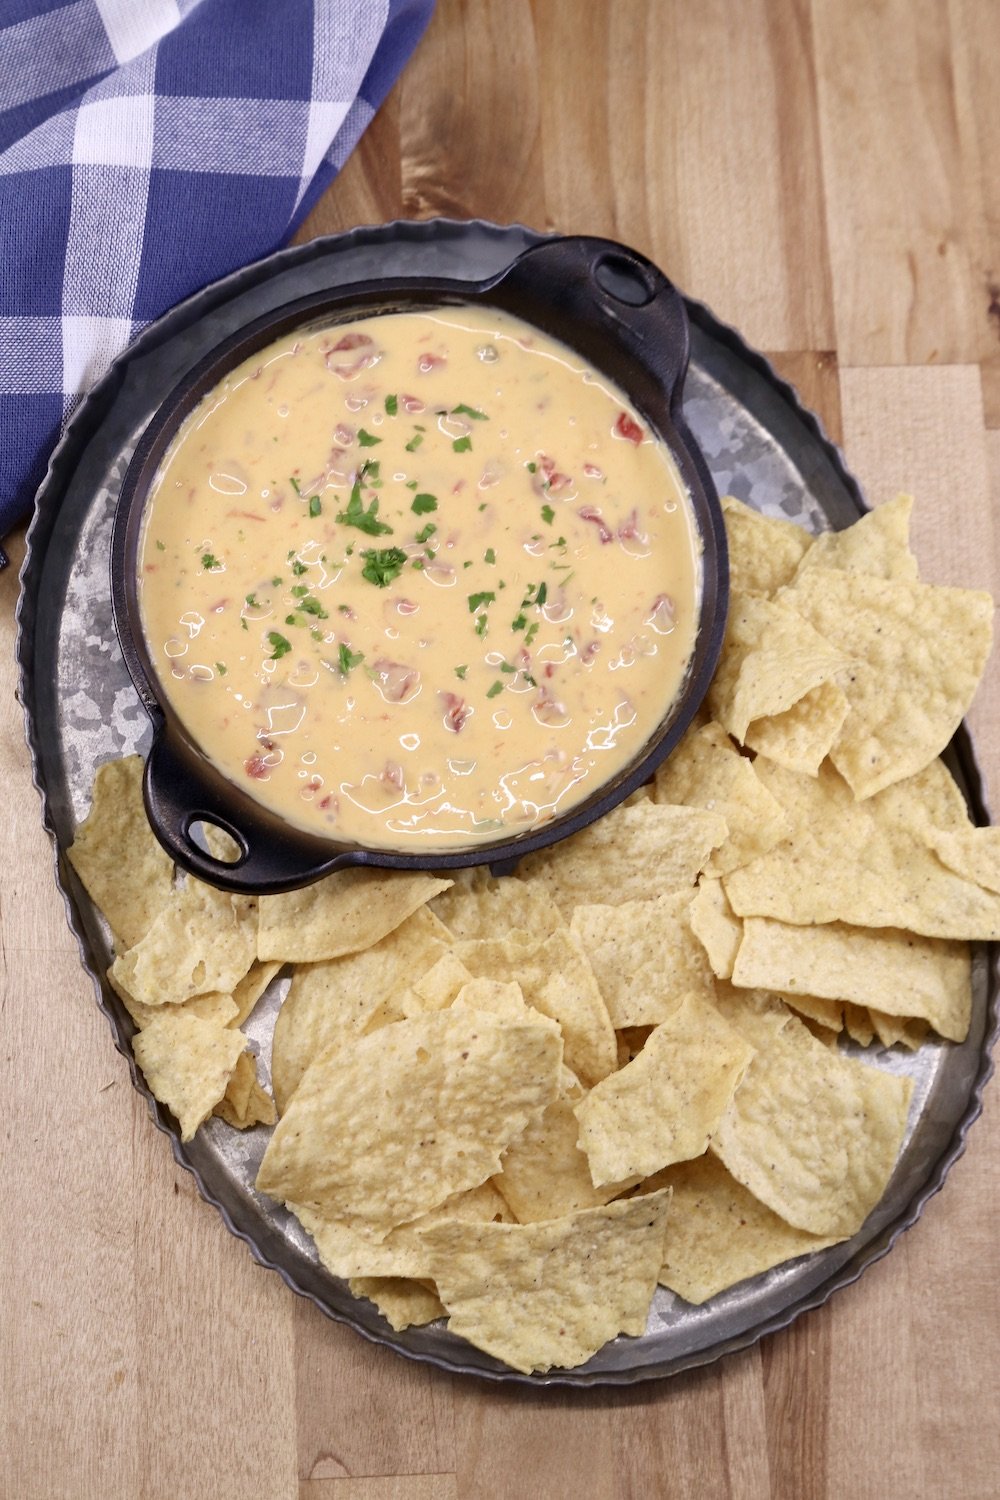 Platter with tortilla chips and cast iron skillet of Cheese Dip